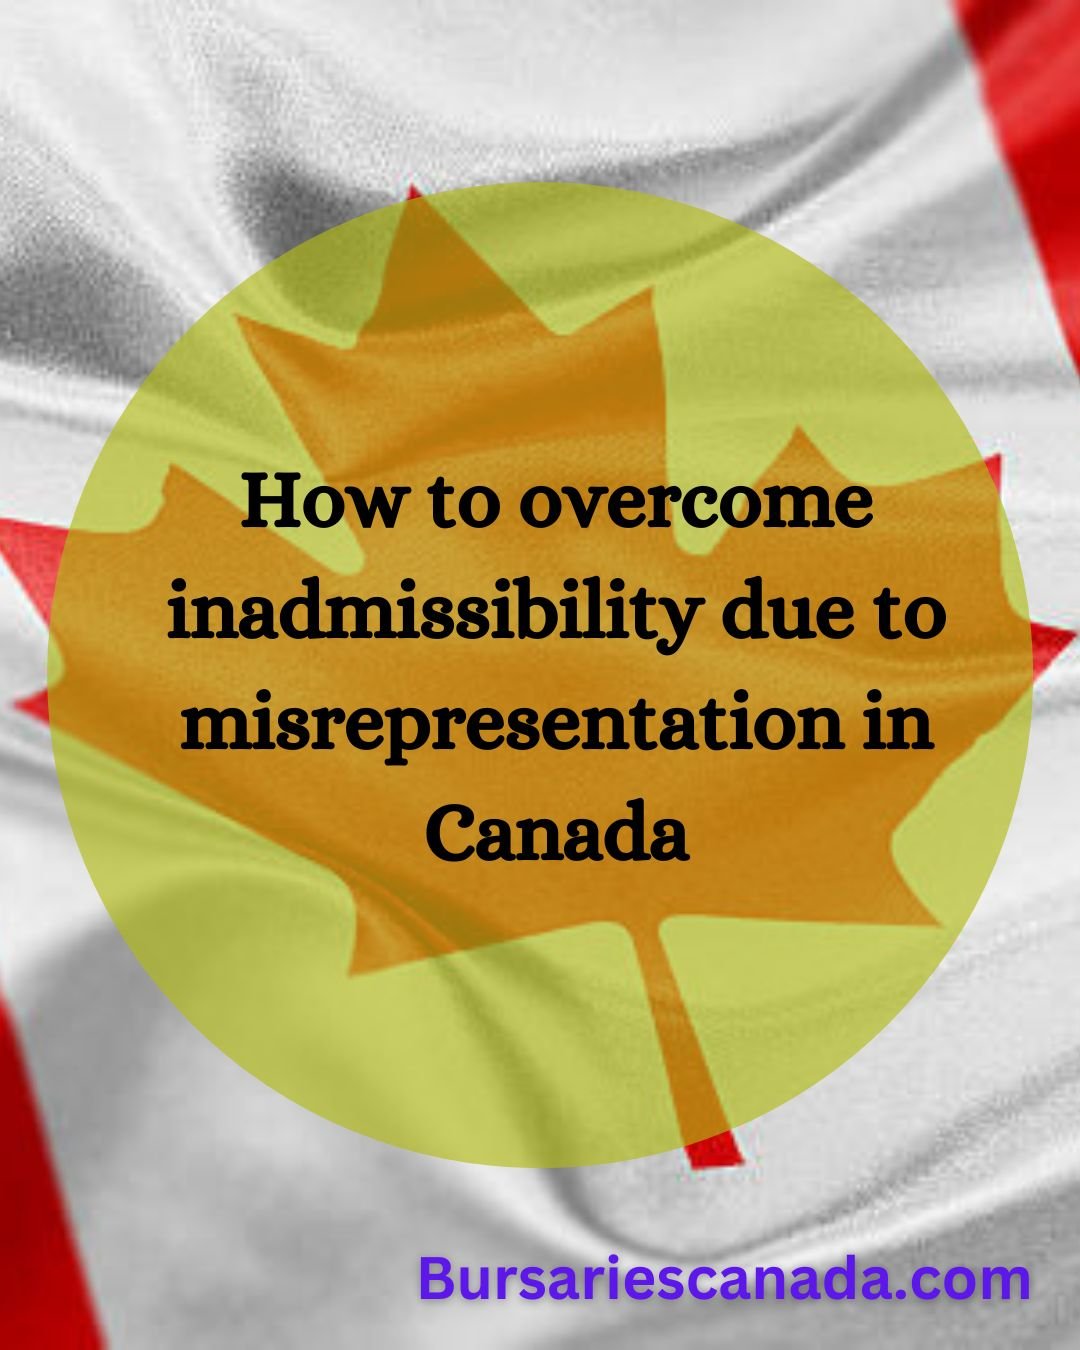 How to overcome inadmissibility due to misrepresentation in Canada